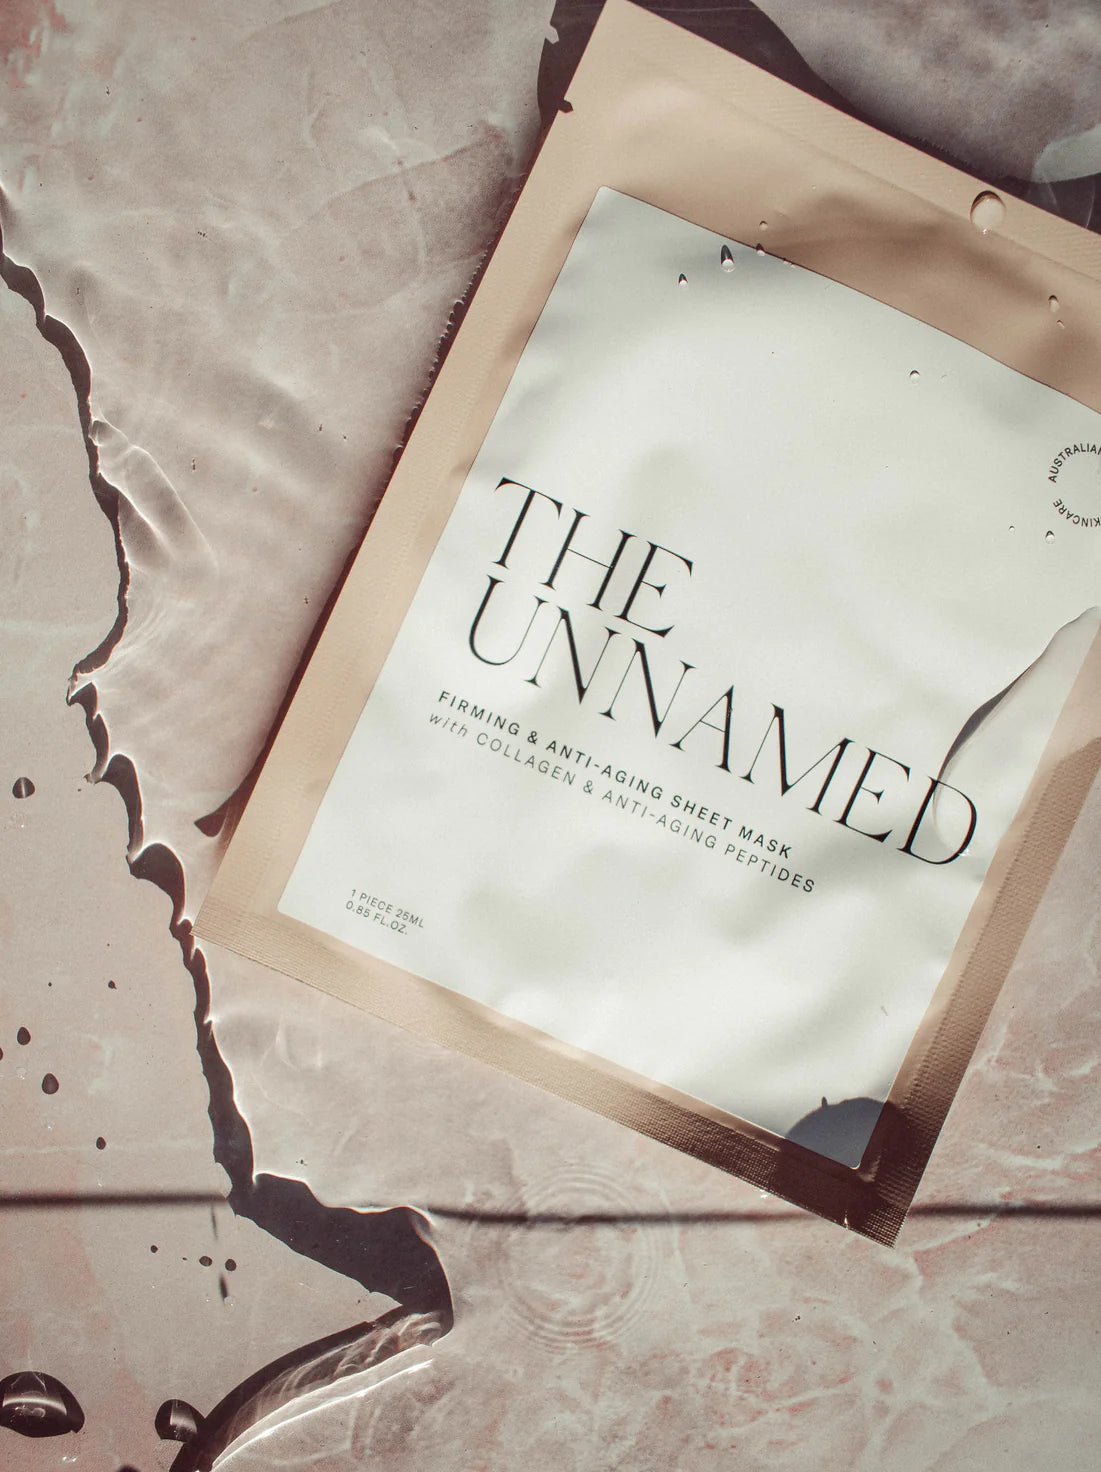 Firming and Anti-Aging sheet mask